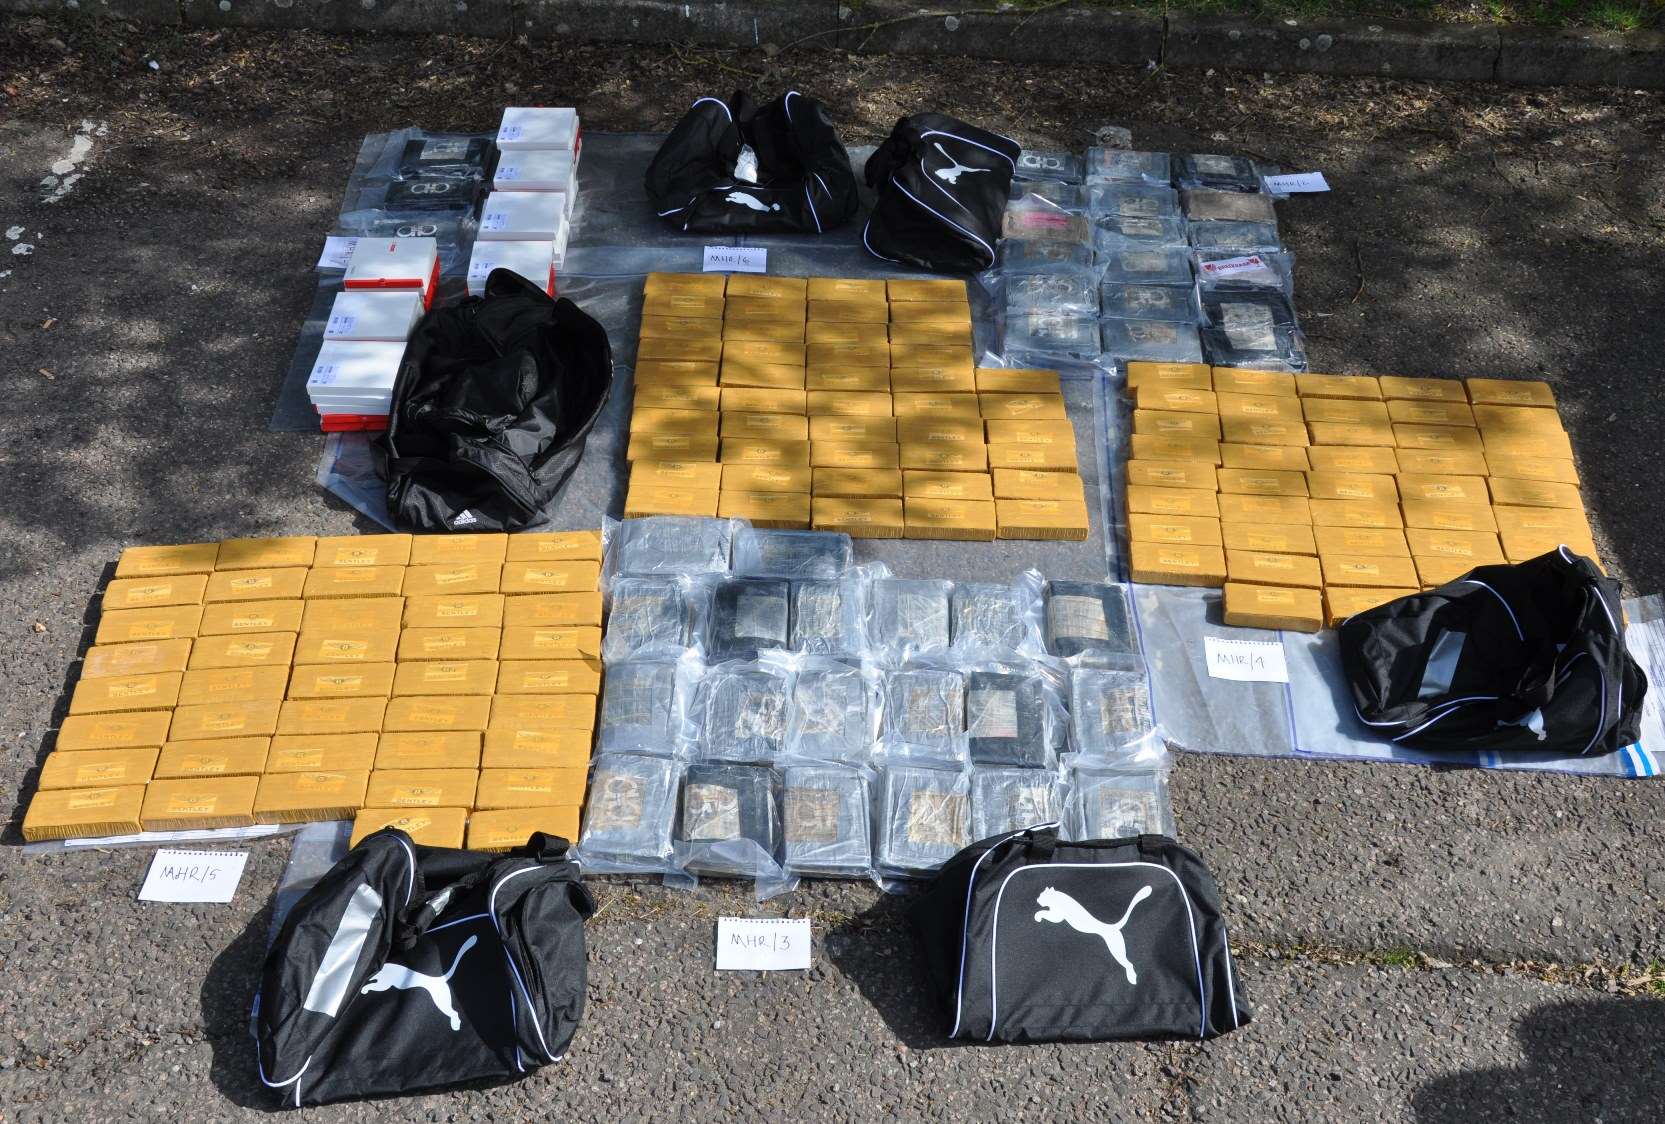 The haul recovered. Picture: National Crime Agency